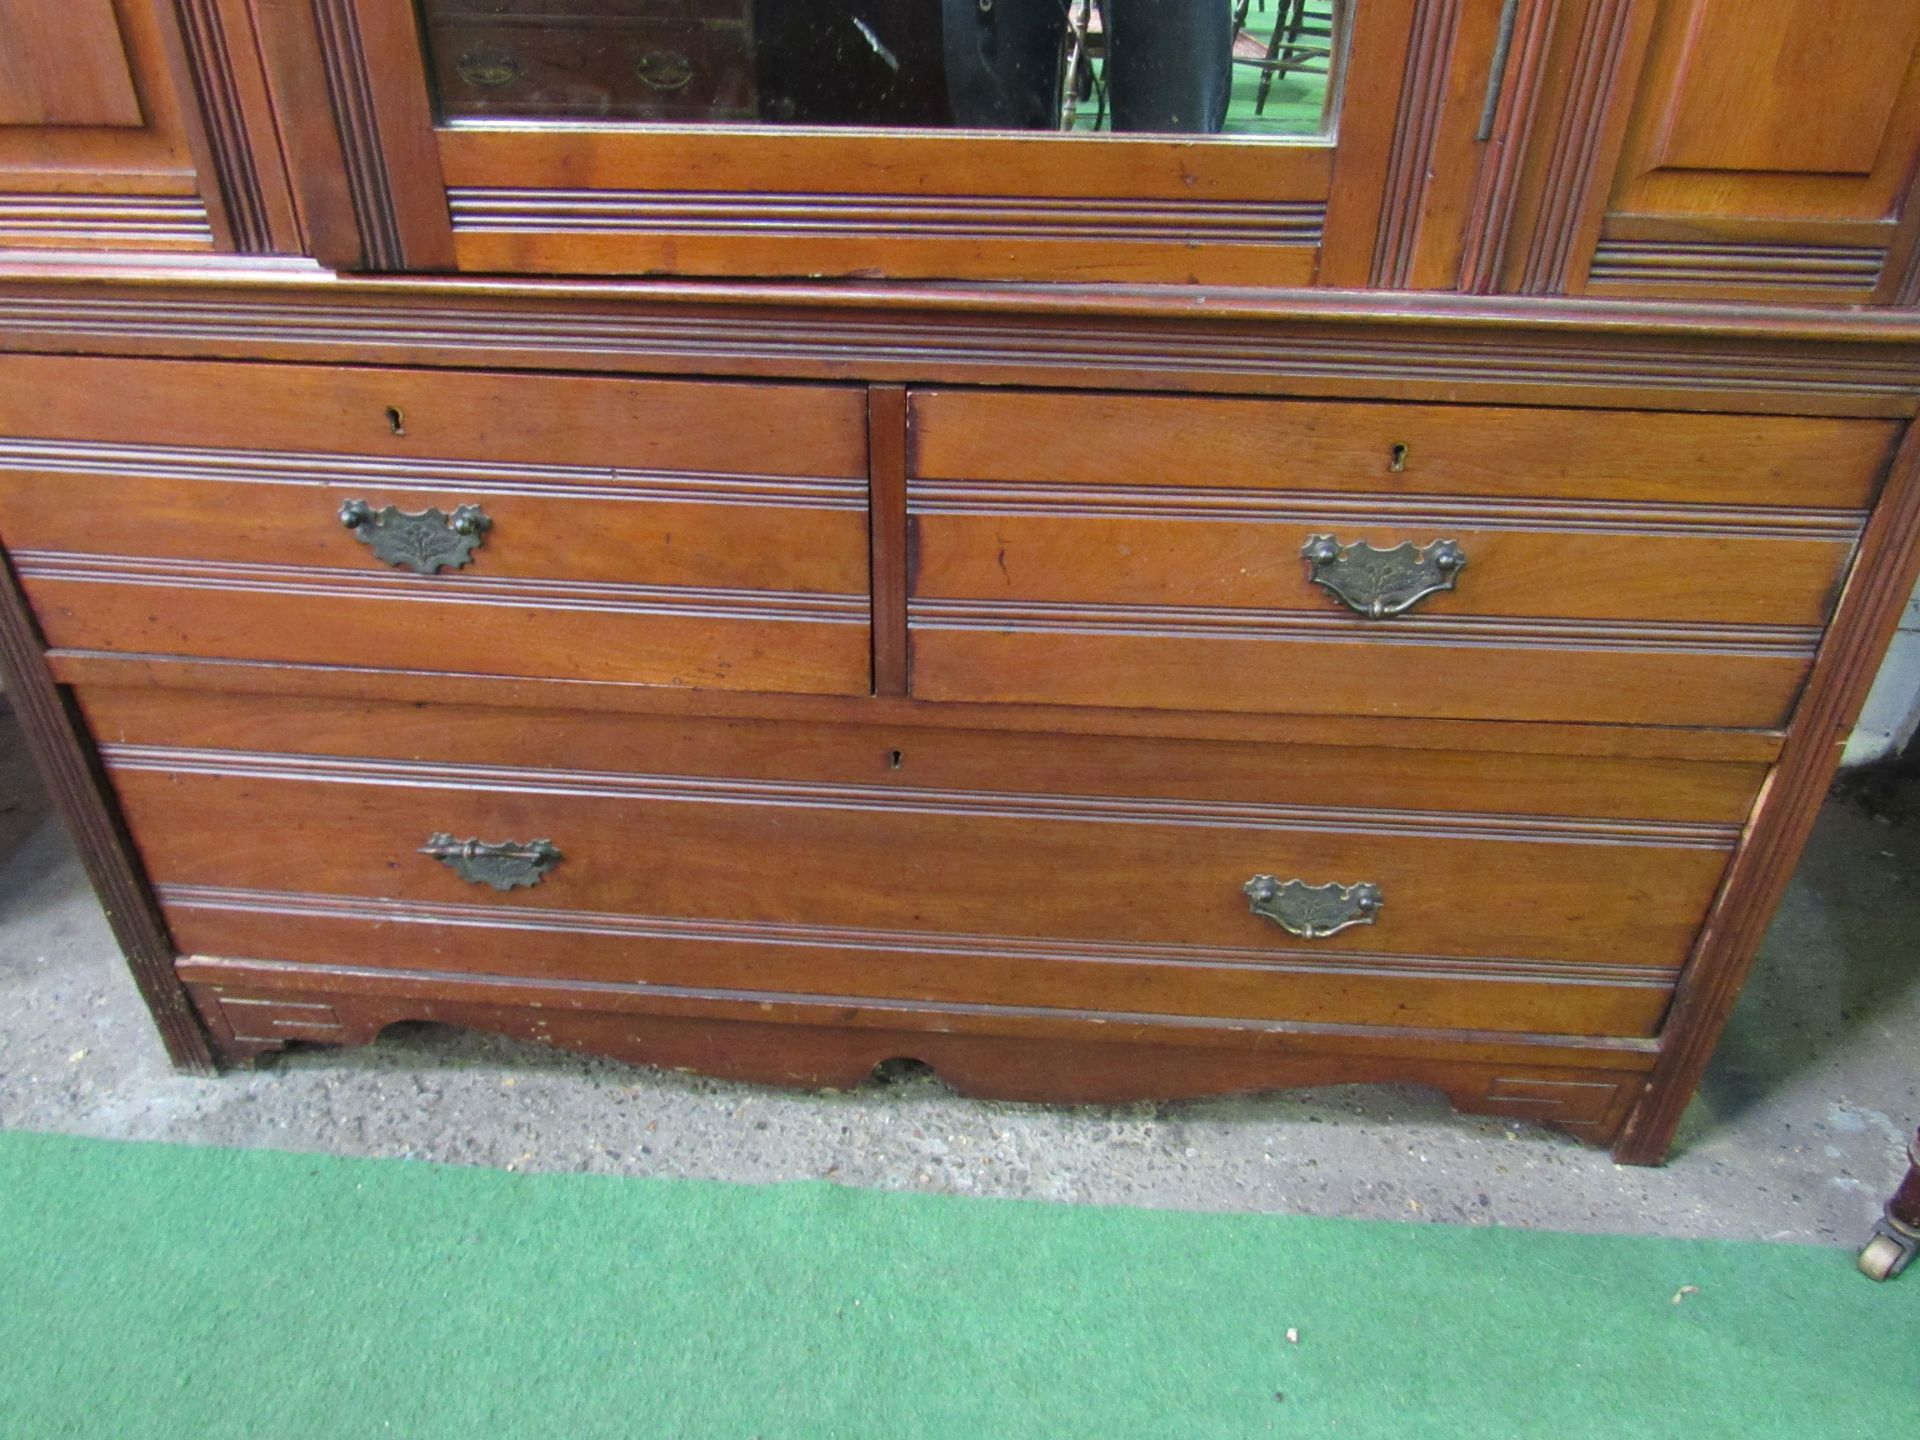 Mahogany wardrobe with mirror door over 2 and 1 drawers. 132 x 51 x 207cms. Estimate £30-50. - Image 2 of 4